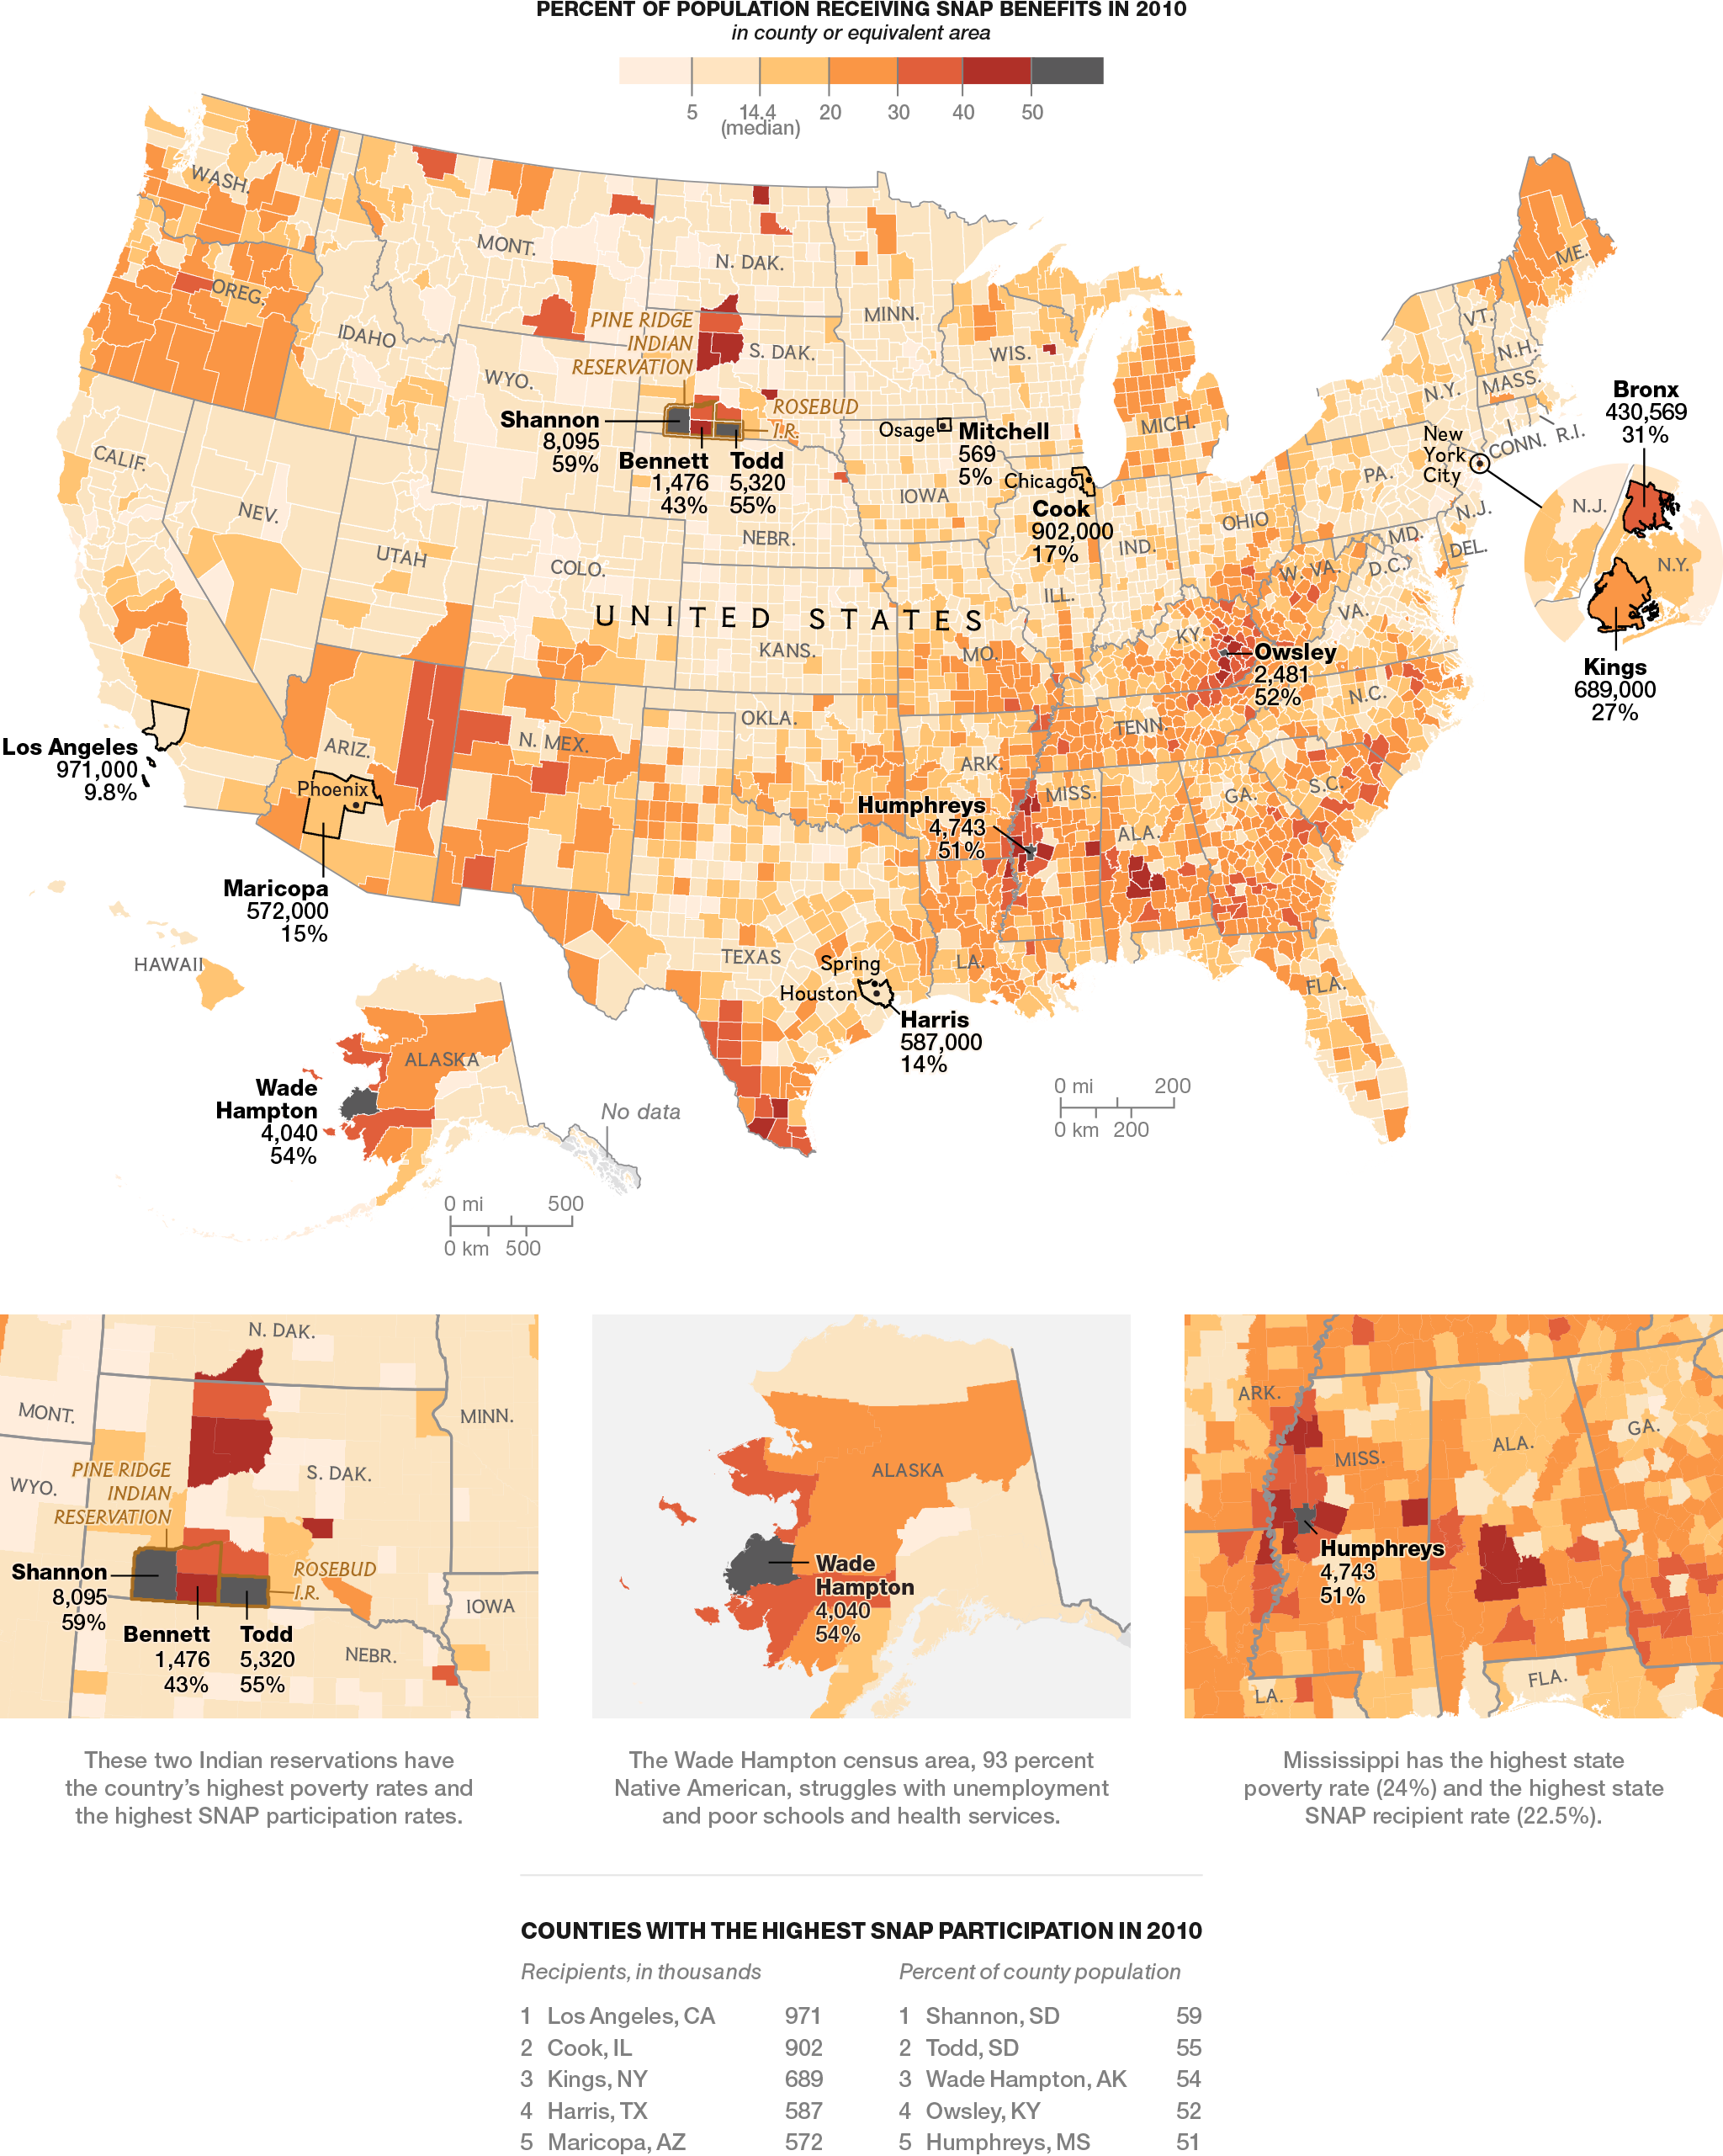 Map of SNAP participation in the United States